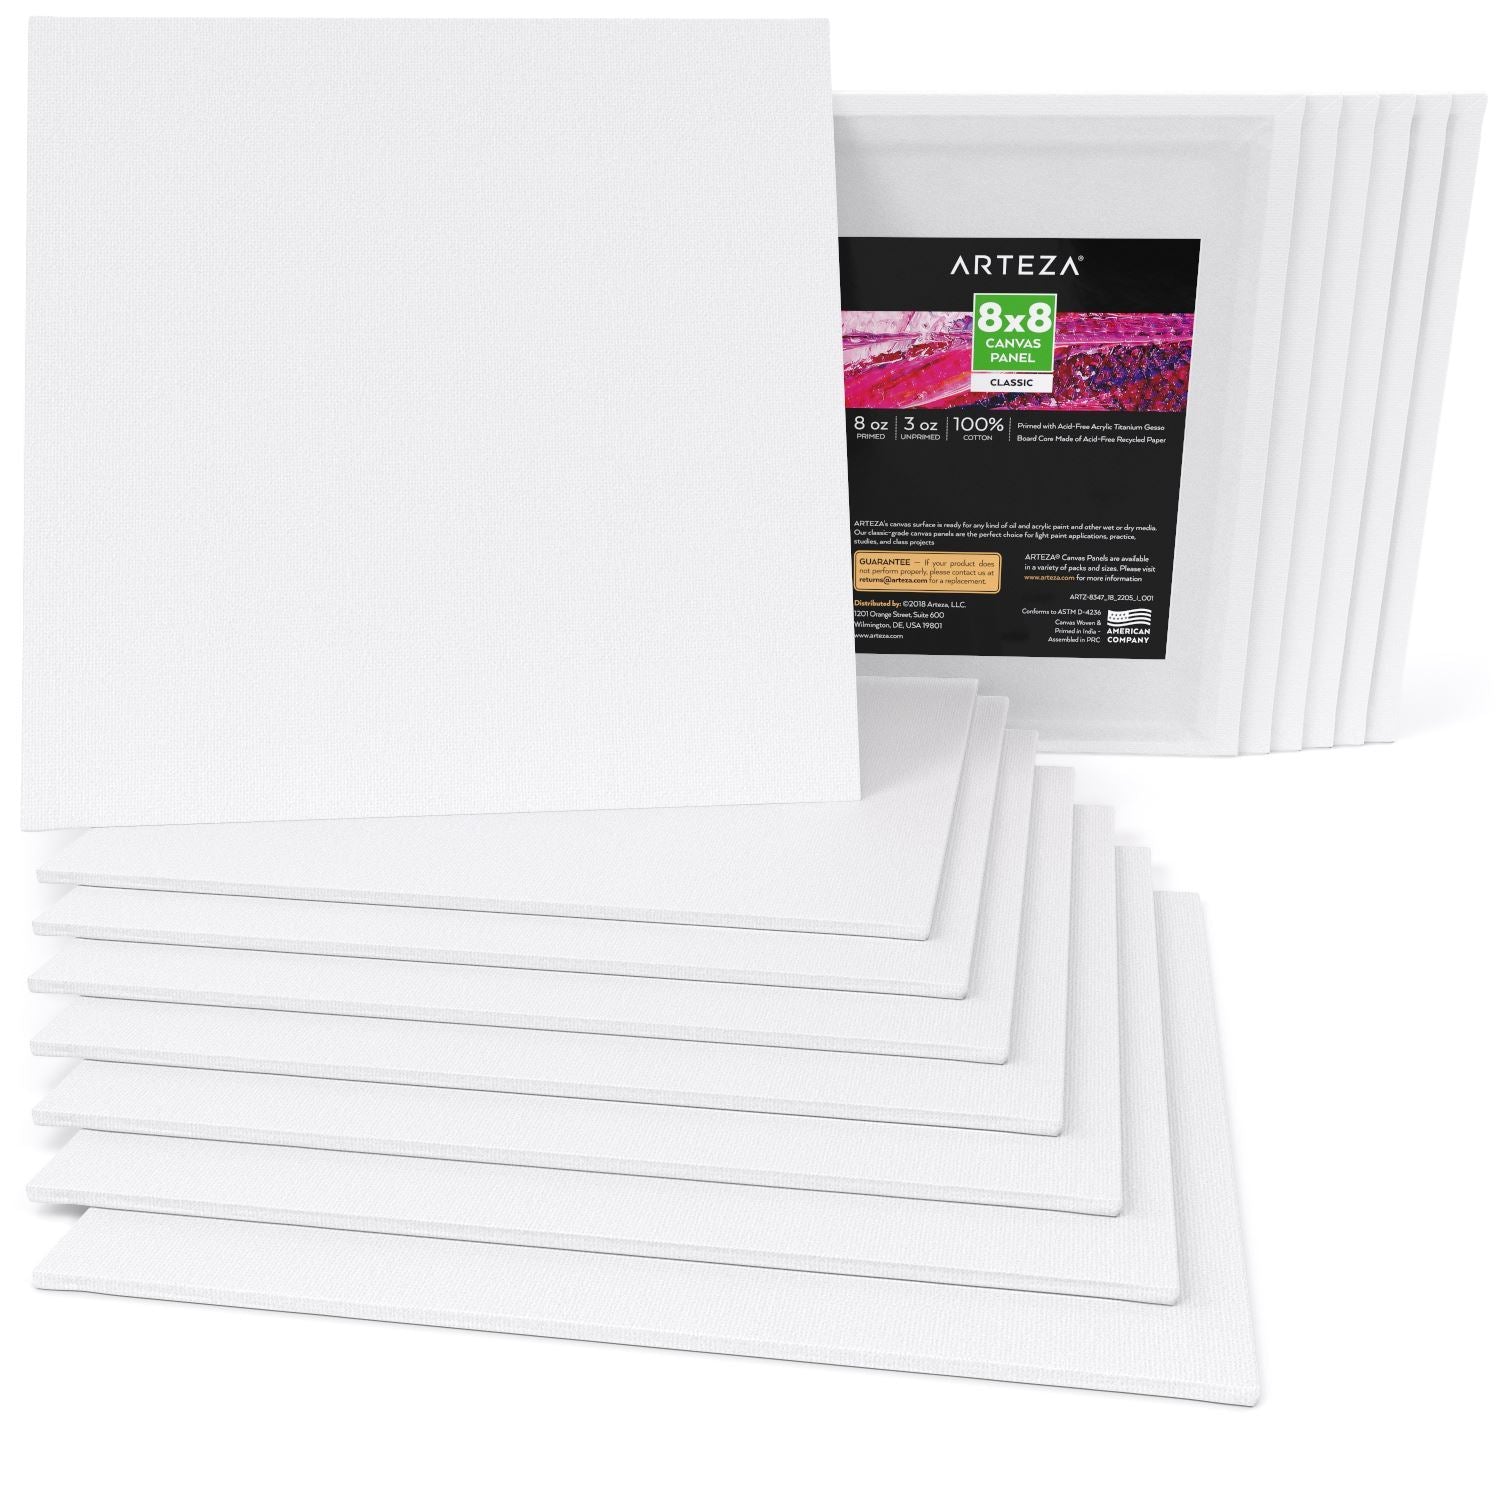  Canvases For Painting, 11 X 14 Inch, 12 Pack Painting  Canvas, Canvas Boards For Painting- Gesso d Acid-Free 100% Cotton Canvas  Panels For Acrylics Oil Watercolor Tempera Paints